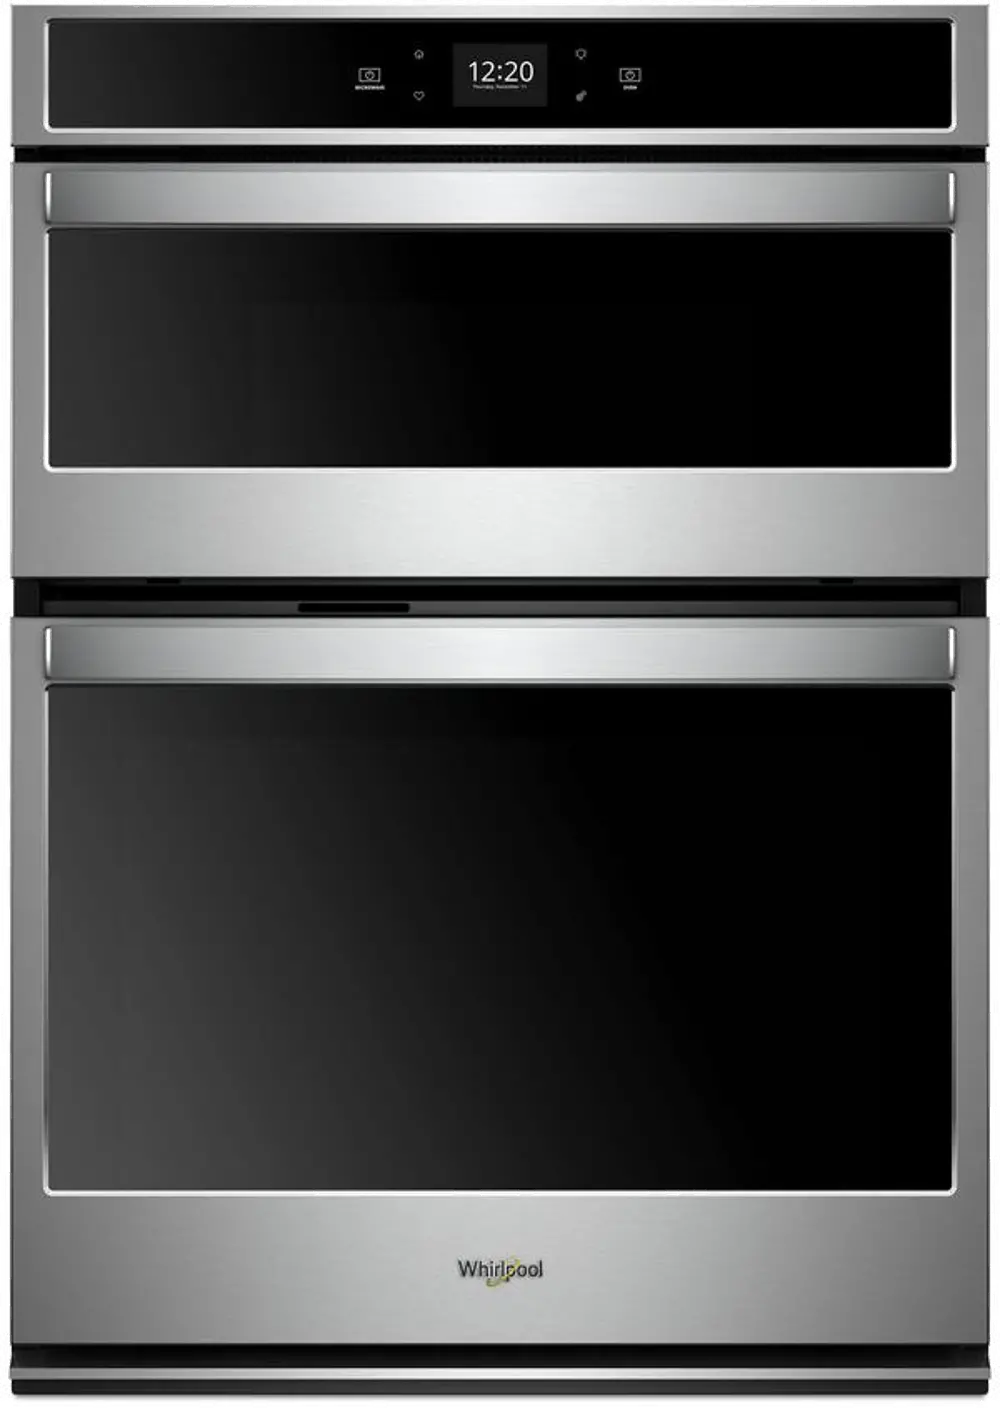 WOC54EC7HS Whirlpool 5.7 cu ft Combination Wall Oven - Stainless Steel 27 Inch-1